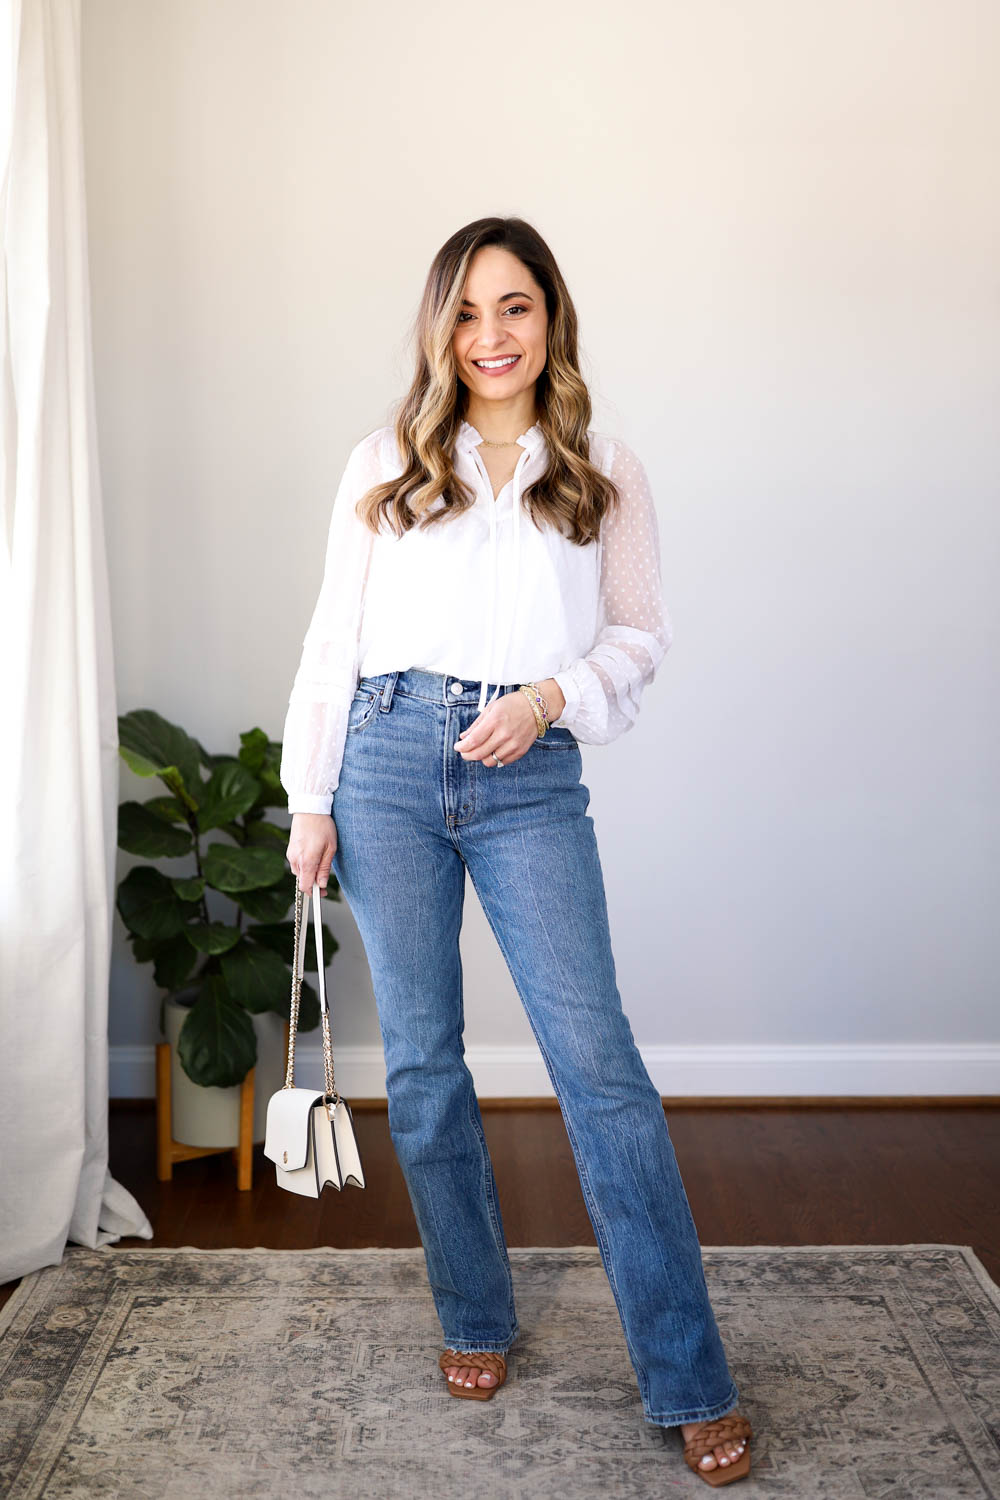 How to wear flare jeans if you have short legs (like me) 